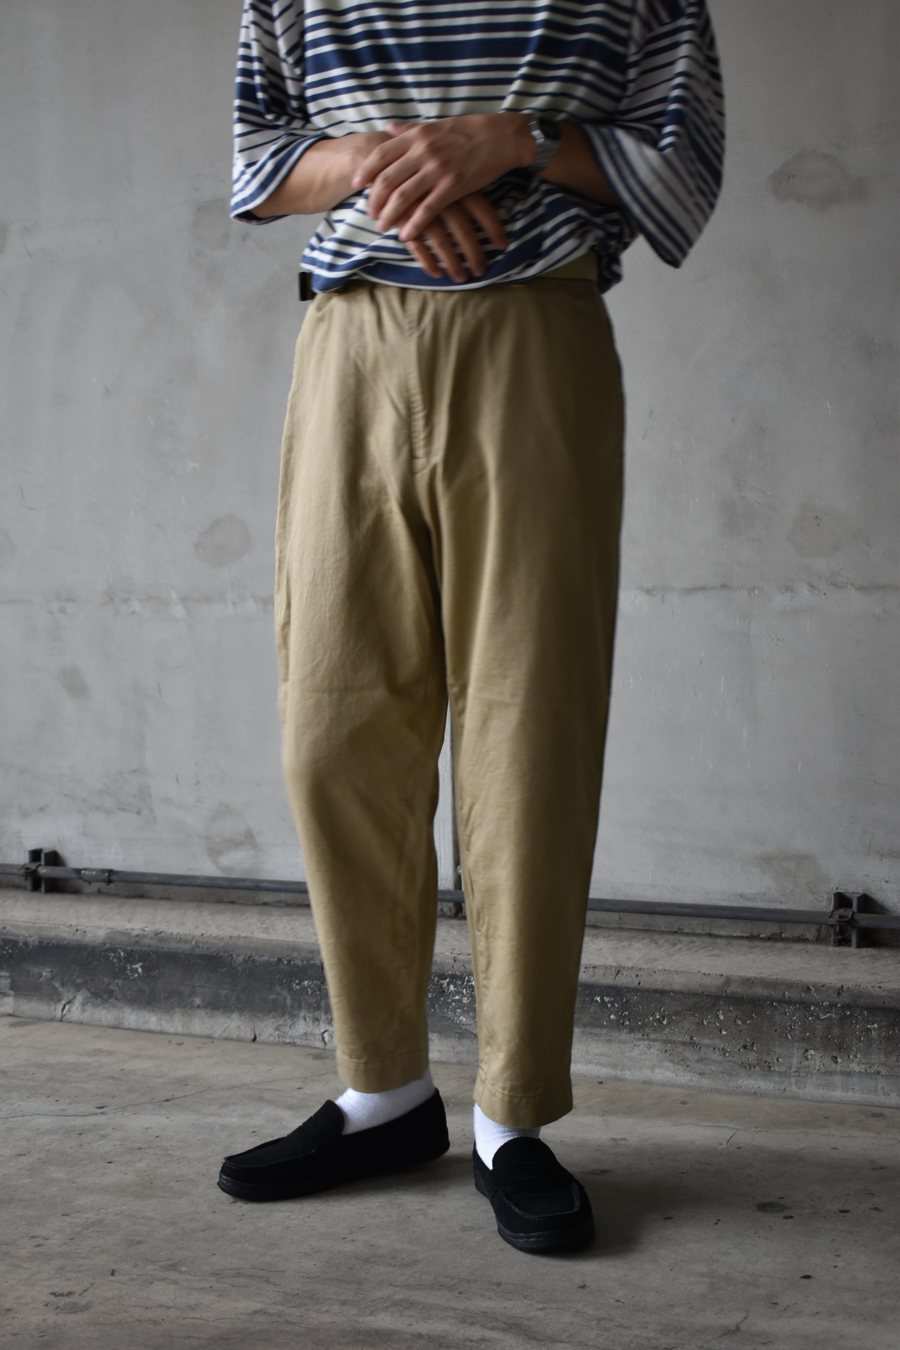 DAMAGEDONE OFFICIAL BLOG: PORTER CLASSIC [SATCHIMO CHINOS / BING